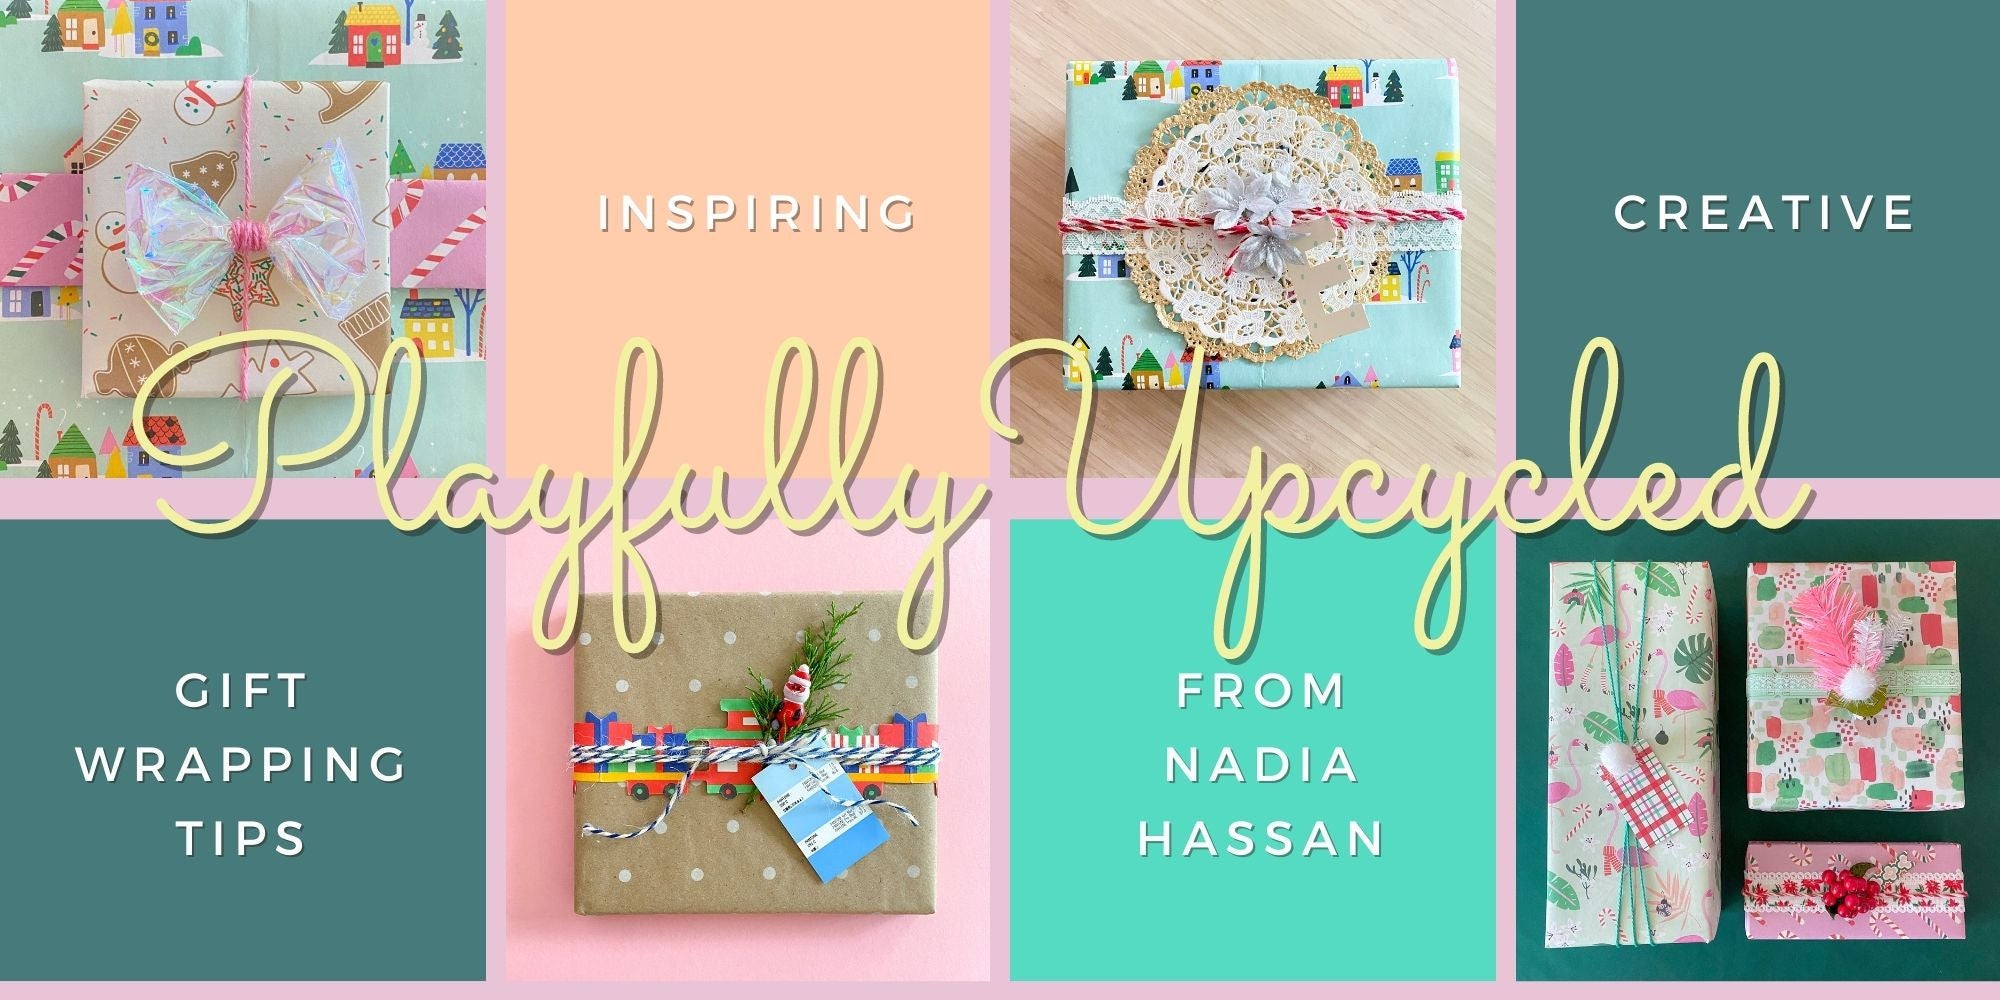 Playfully Upcycled - Inspiring Creative Gift Wrapping Tips from Nadia Hassan